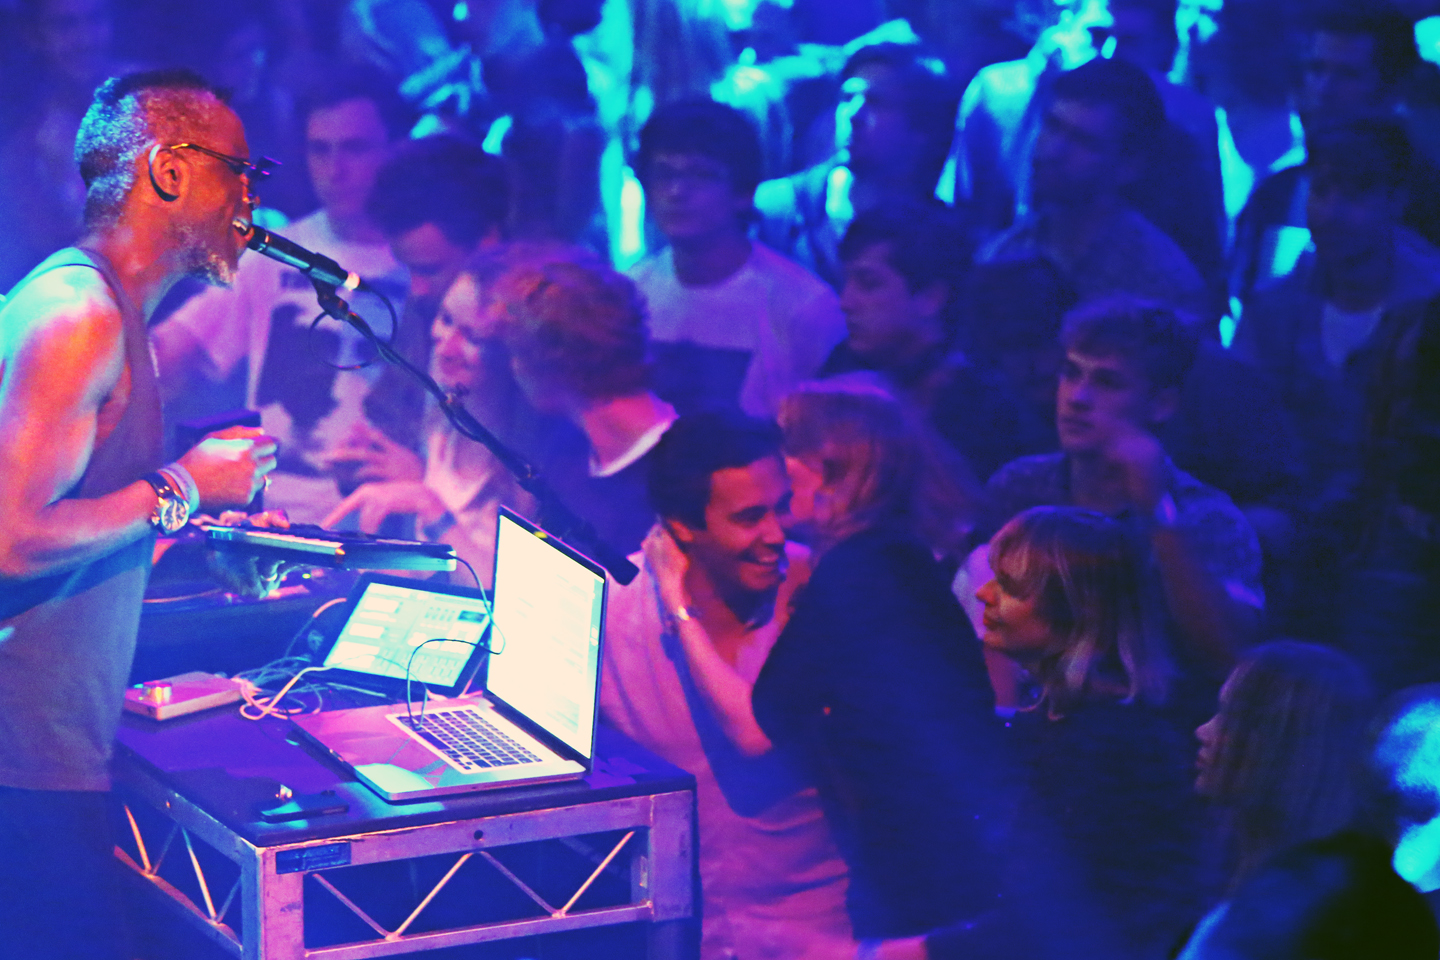 A DJ performing on stage to a lively audience.